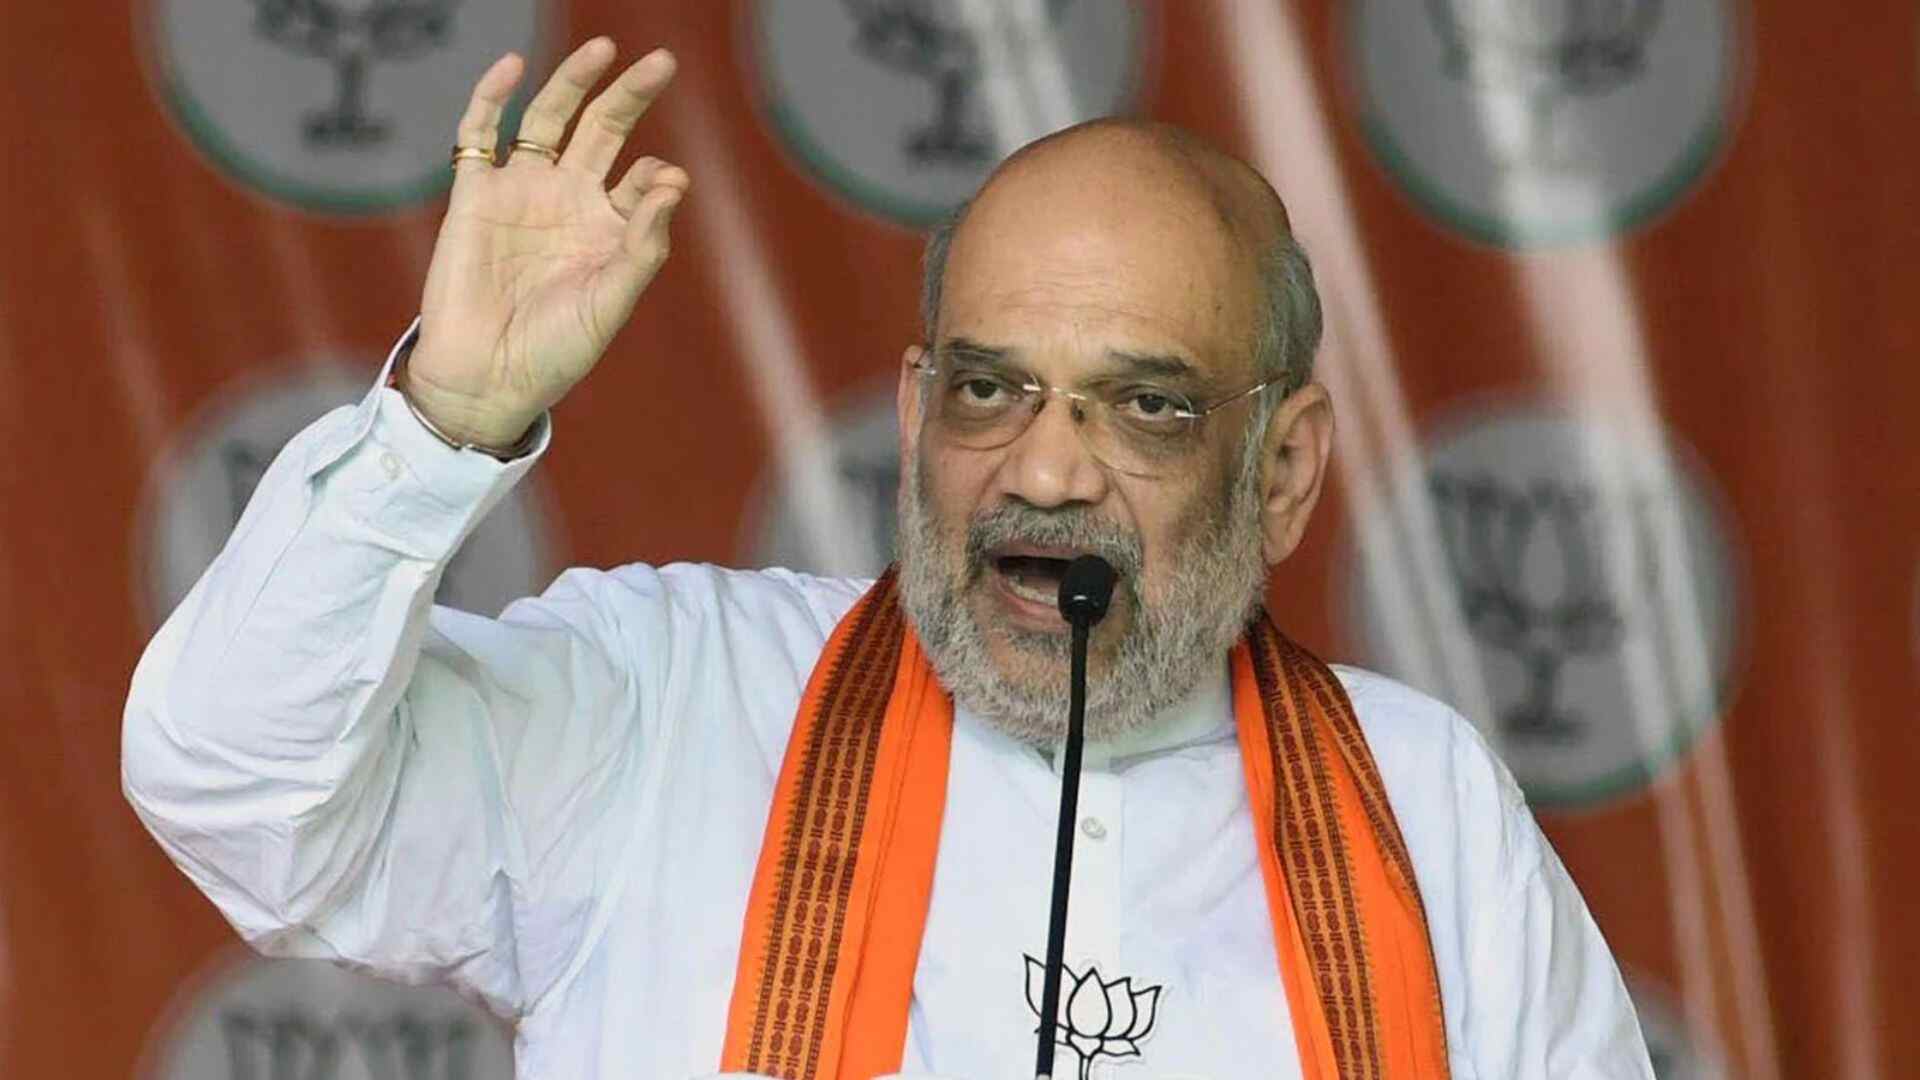 ‘We will not allow reservation for Muslims in Haryana’: Amit Shah